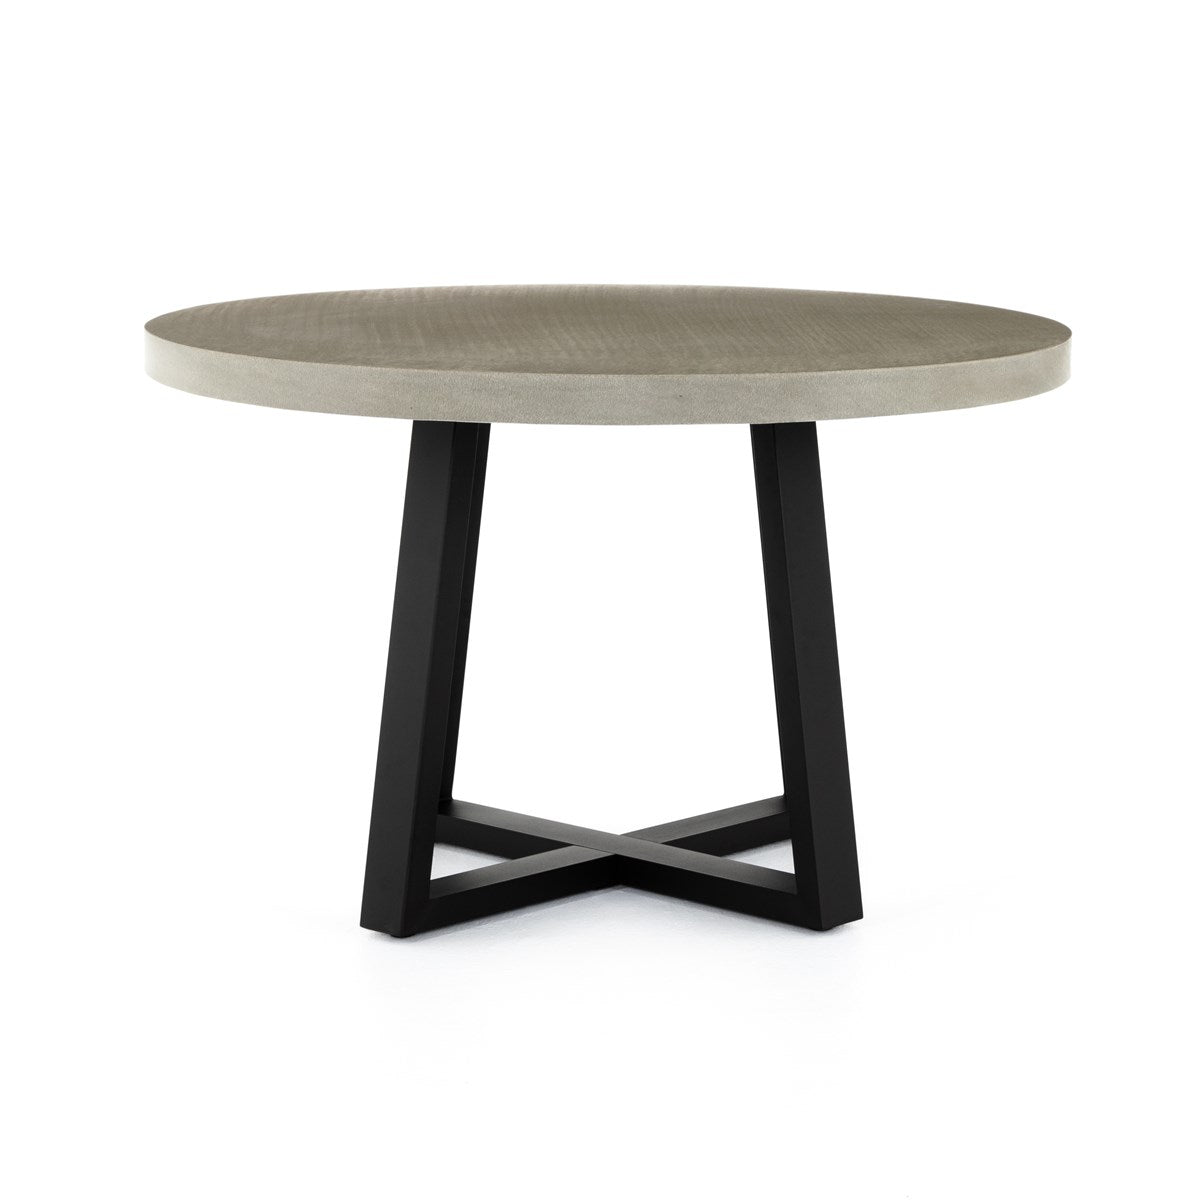 Cyrus Outdoor Round Dining Table Dining Table Four Hands     Four Hands, Burke Decor, Mid Century Modern Furniture, Old Bones Furniture Company, Old Bones Co, Modern Mid Century, Designer Furniture, https://www.oldbonesco.com/